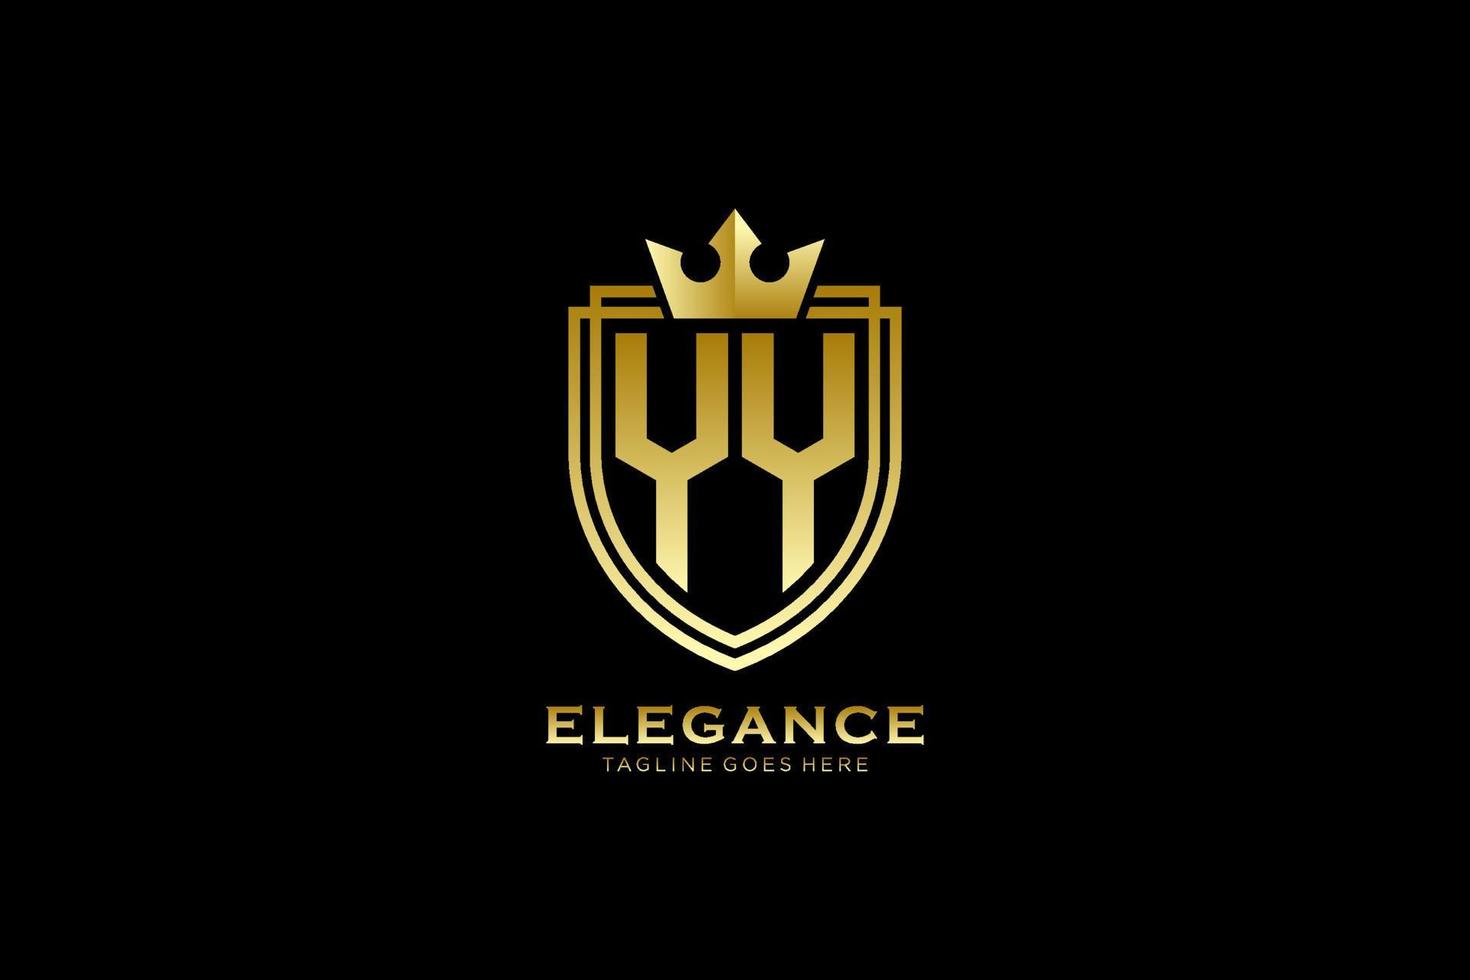 initial YY elegant luxury monogram logo or badge template with scrolls and royal crown - perfect for luxurious branding projects vector